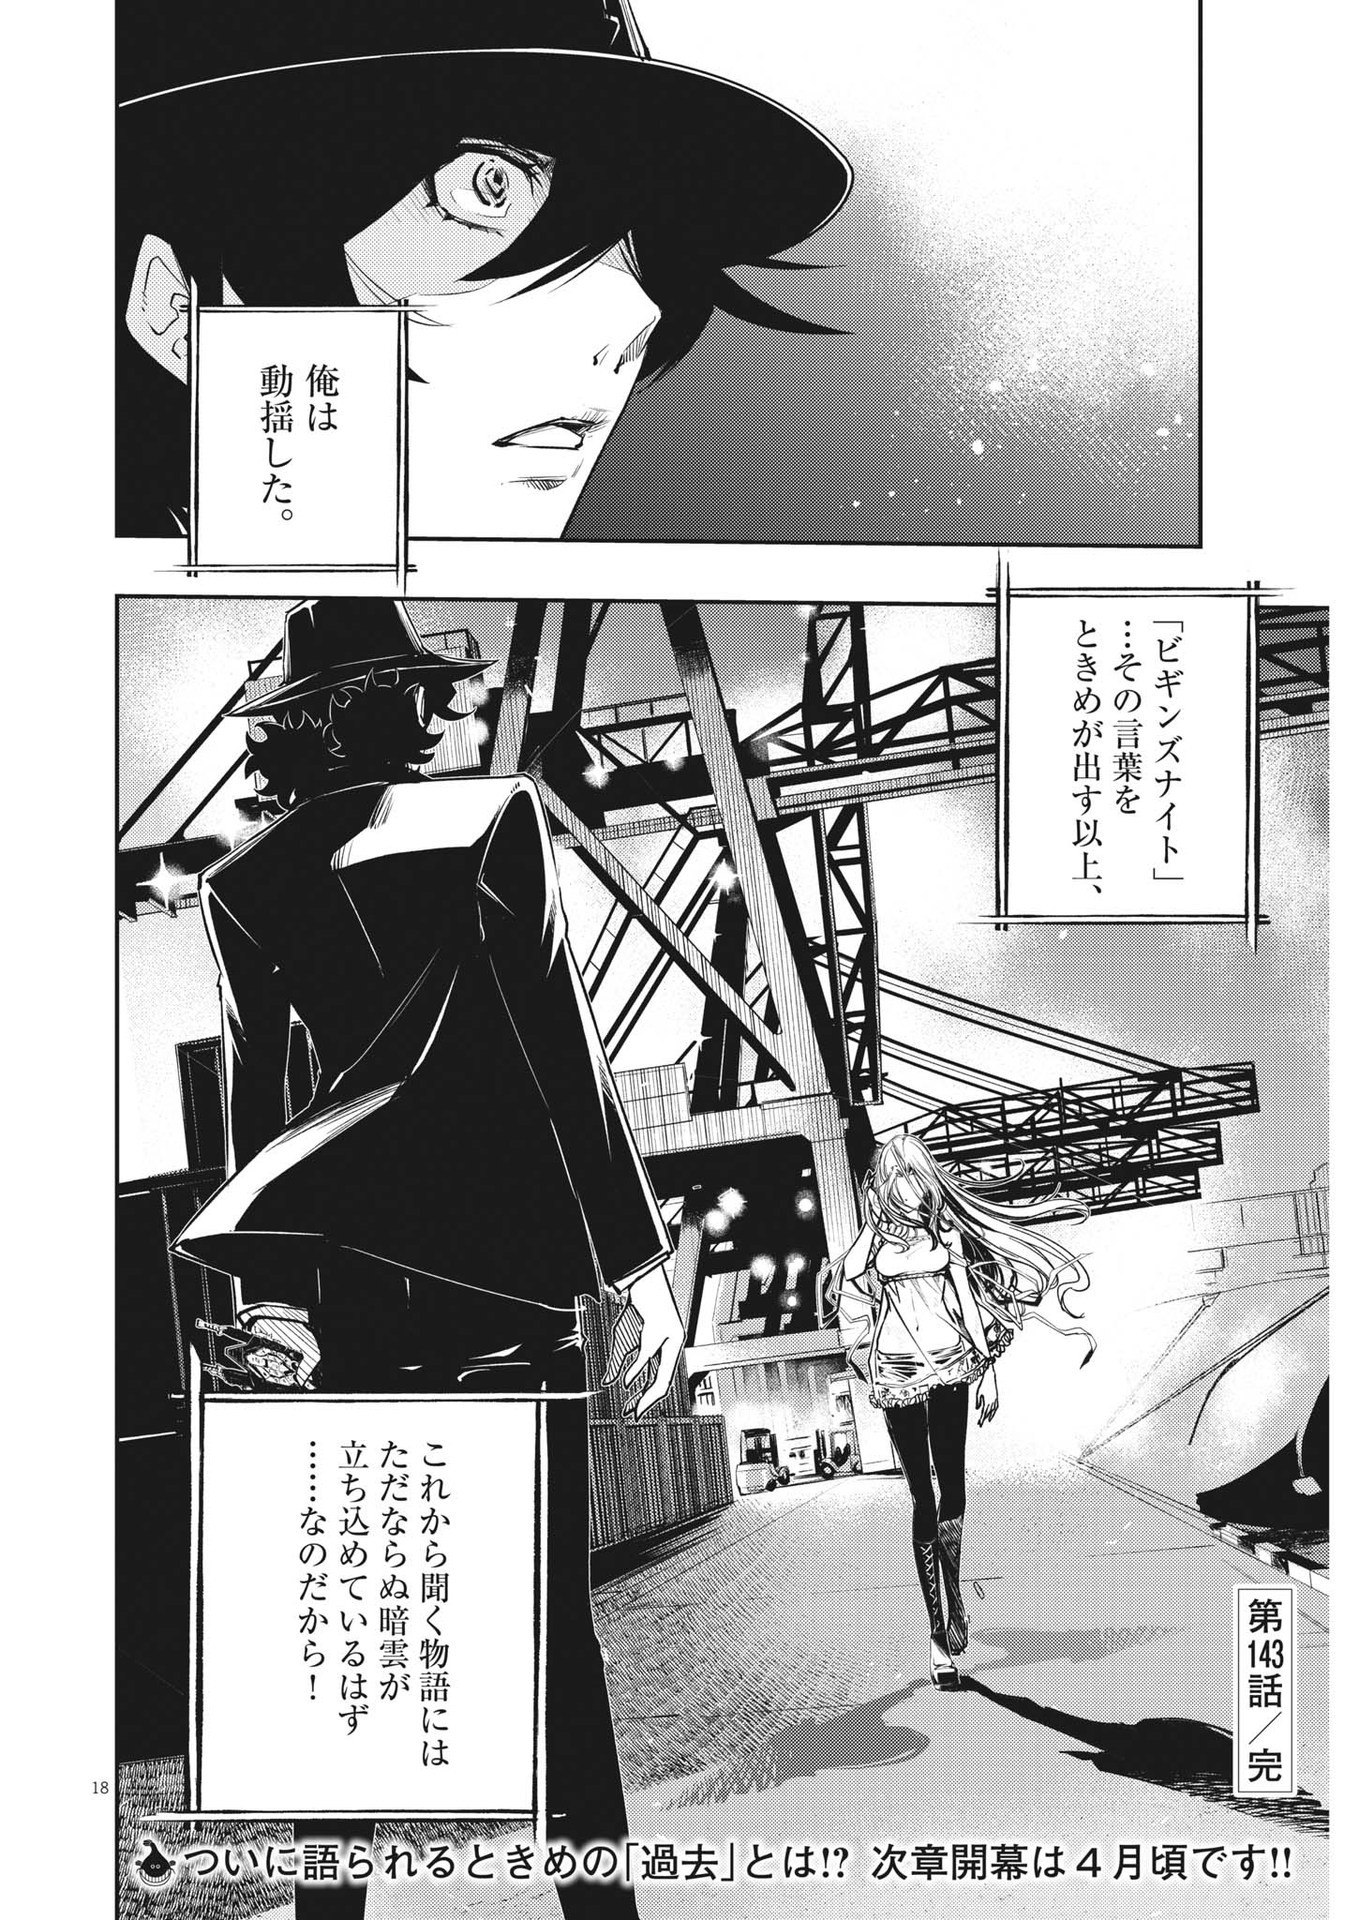 Kamen Rider W: Fuuto Tantei - Chapter 143 - Page 18